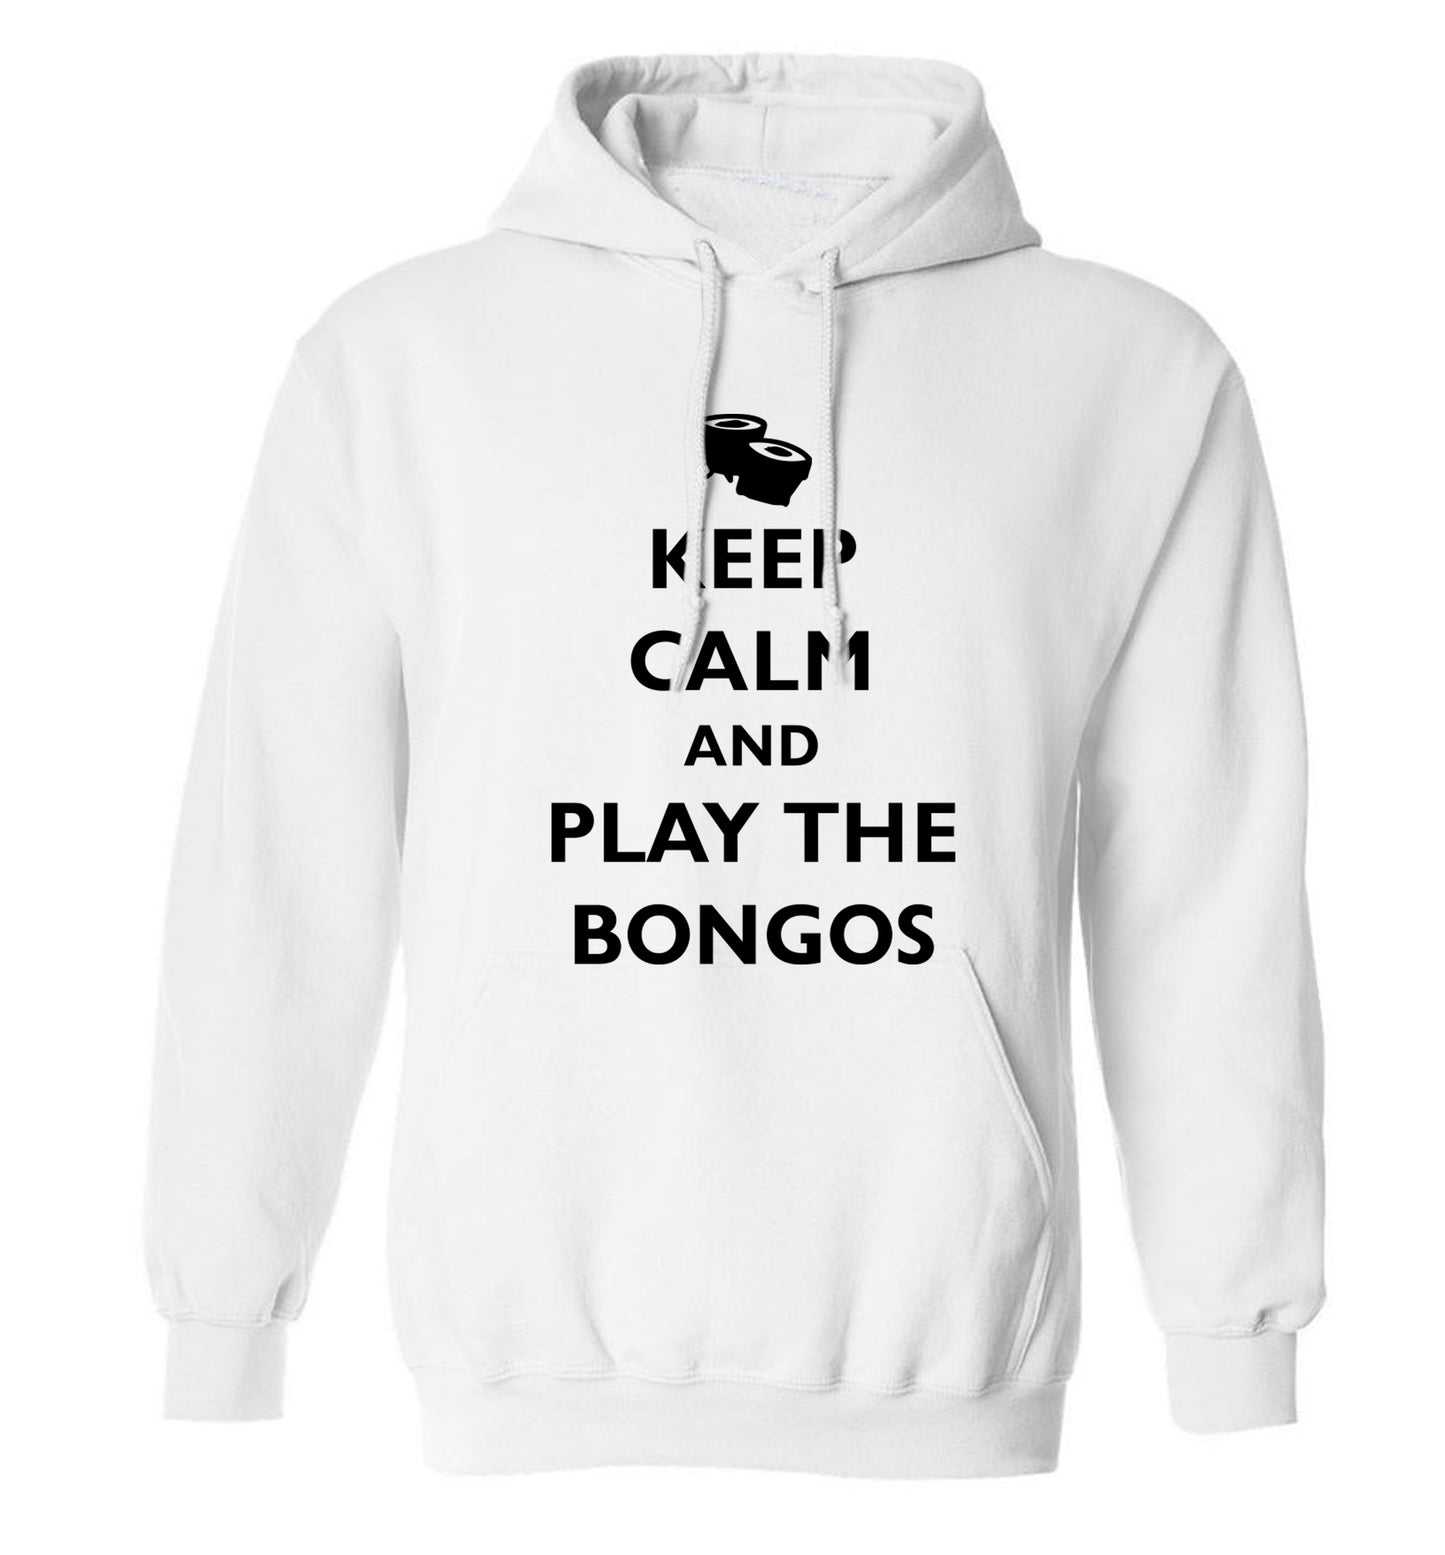 Keep calm and play the bongos adults unisex white hoodie 2XL